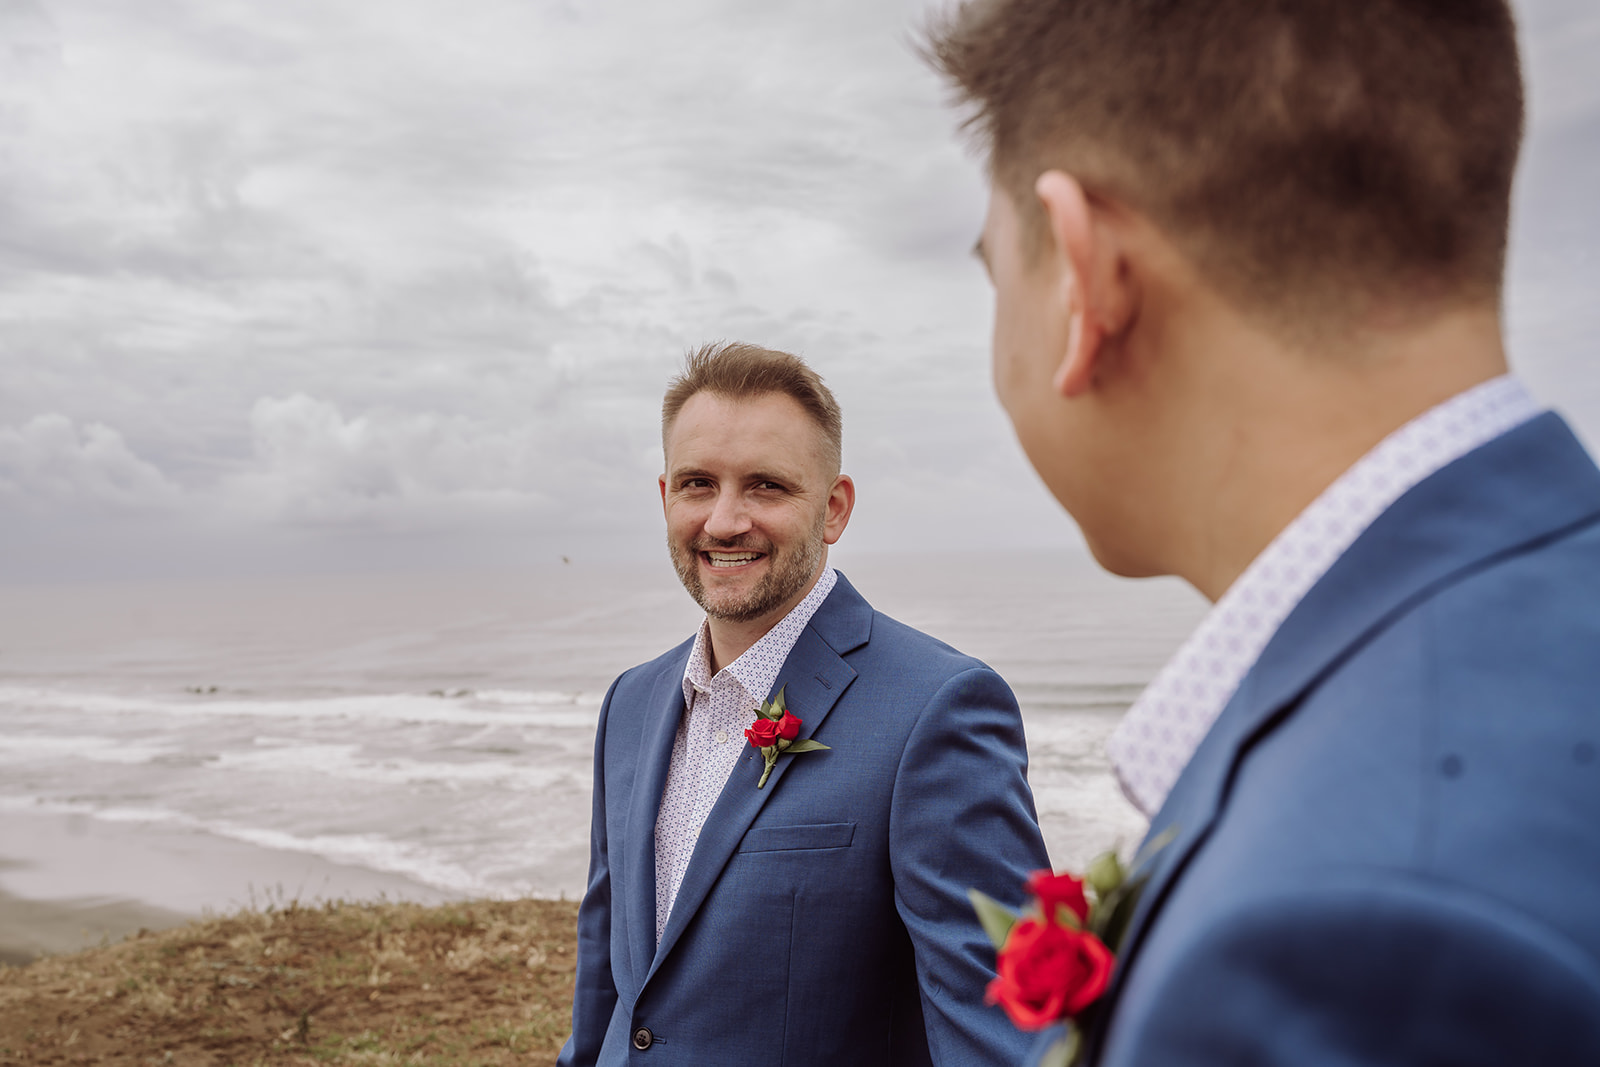 An inclusive intimate wedding and elopement photographer, Xilo Photography, Kati Douglas who is based in Oakland, California in the bay area, took this picture of a same sex gay couple on their wedding day/elopement day as the two grooms lean in near the beach with waves crashing in the background at Fort Funston, CA which was their intimate wedding venue. Ever wondered what is an intimate wedding or what would be considered a small wedding? This is a great example of both! 